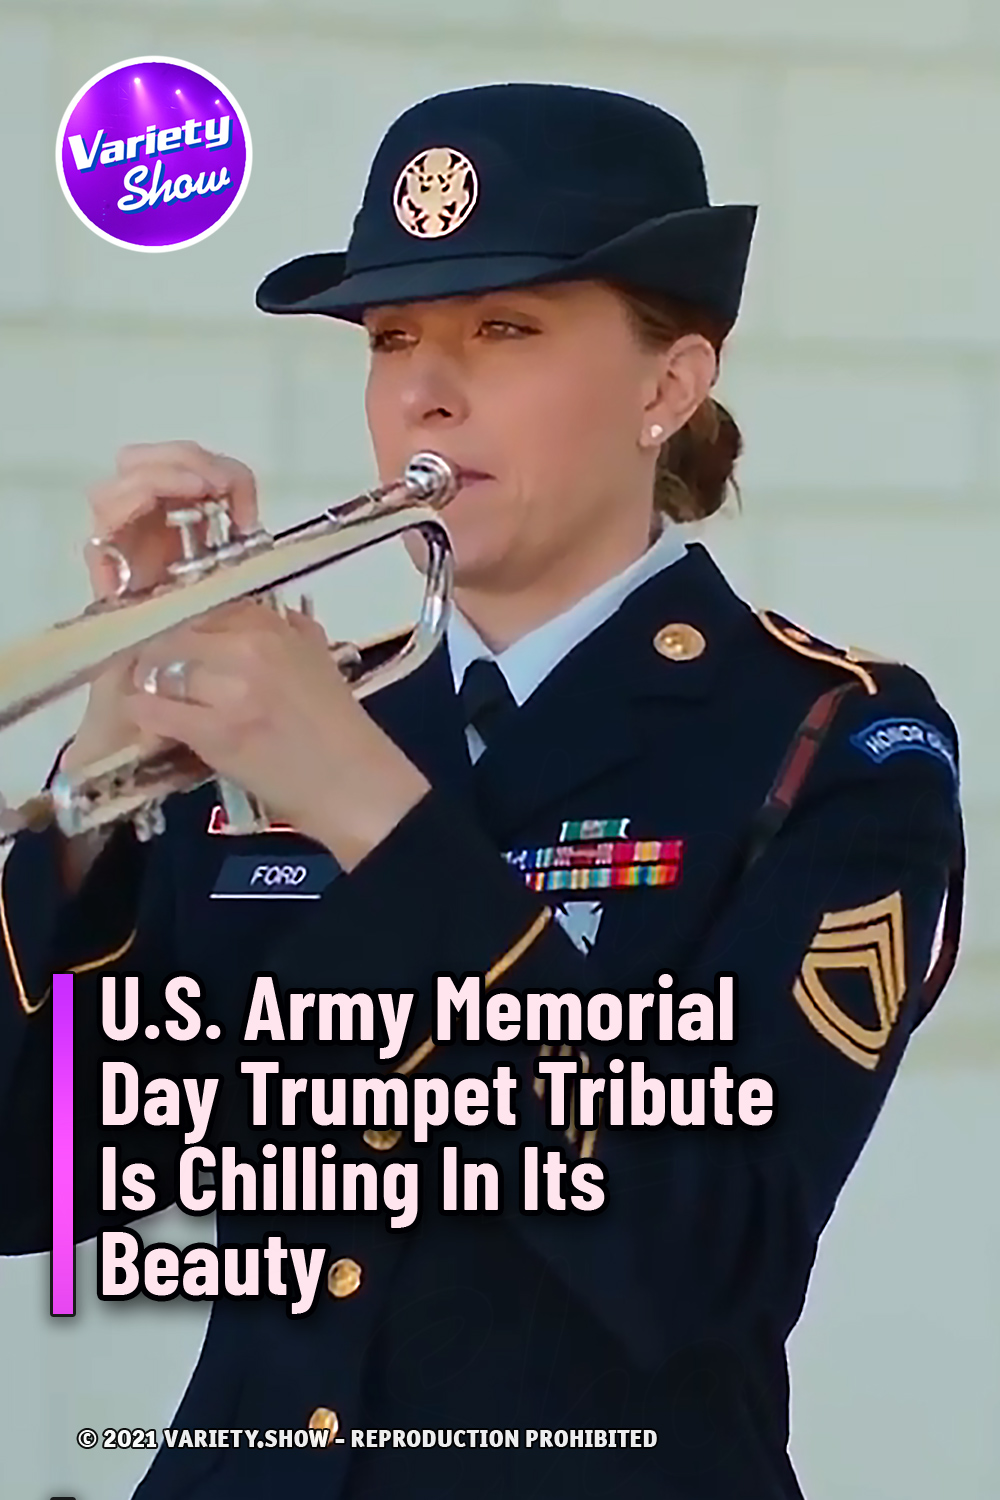 U.S. Army Memorial Day Trumpet Tribute Is Chilling In Its Beauty